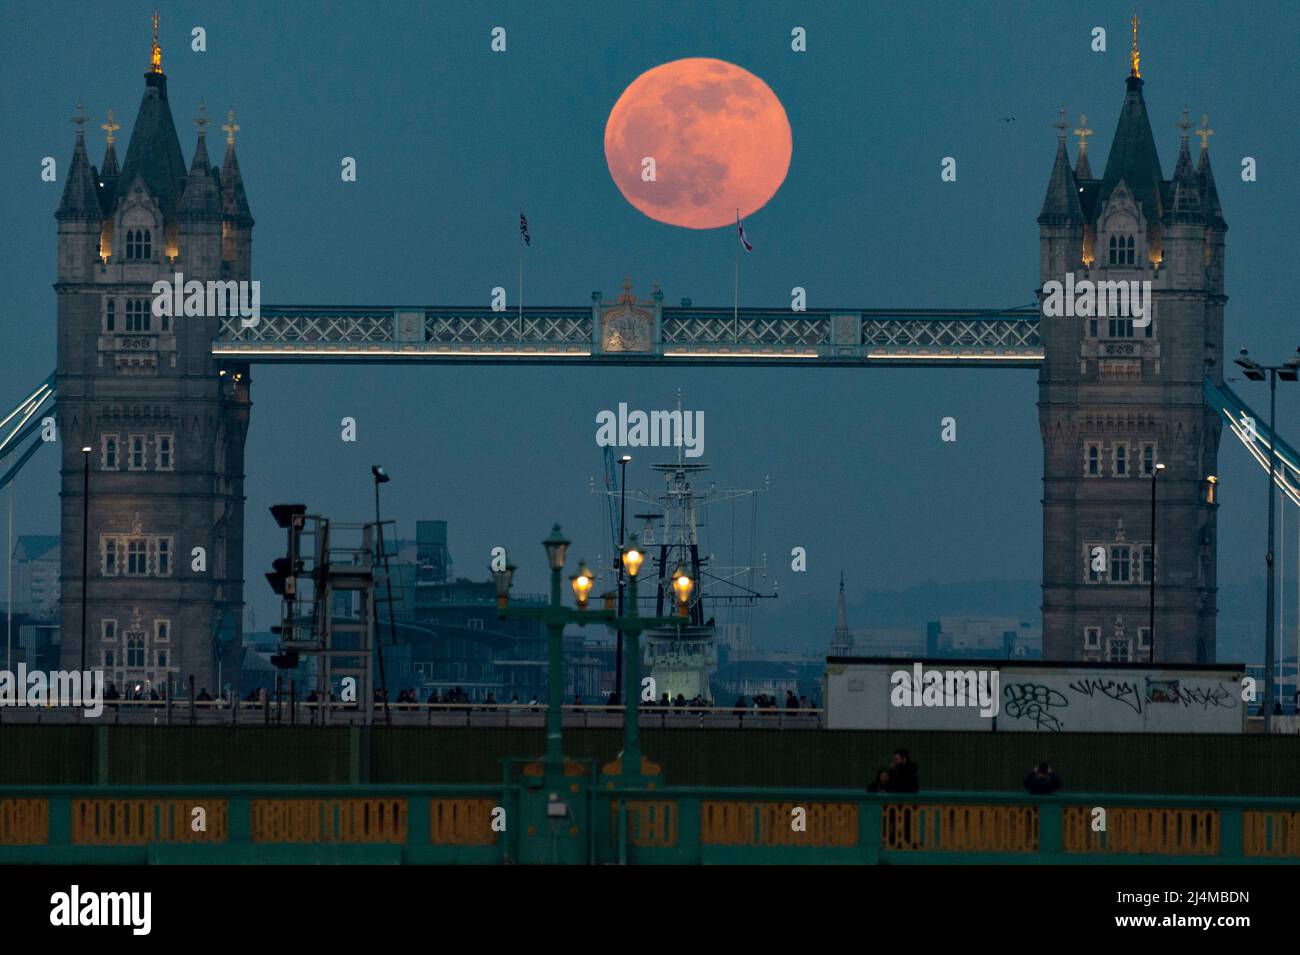 London, UK.  16 April 2022.  UK Weather – April’s full moon, known as a Pink Moon, rises behind Tower Bridge.  According to the Old Farmer’s Almanac, the name Pink Moon comes from the full moon coinciding with early springtime pink blooms of the Phlox subulata, a North American wildflower.  April’s full moon is also the Paschal full moon (the first full Moon of spring) with Easter celebrated on the first Sunday after the Paschal full moon, this year on Sunday, April 17.  Credit: Stephen Chung / Alamy Live News Stock Photo